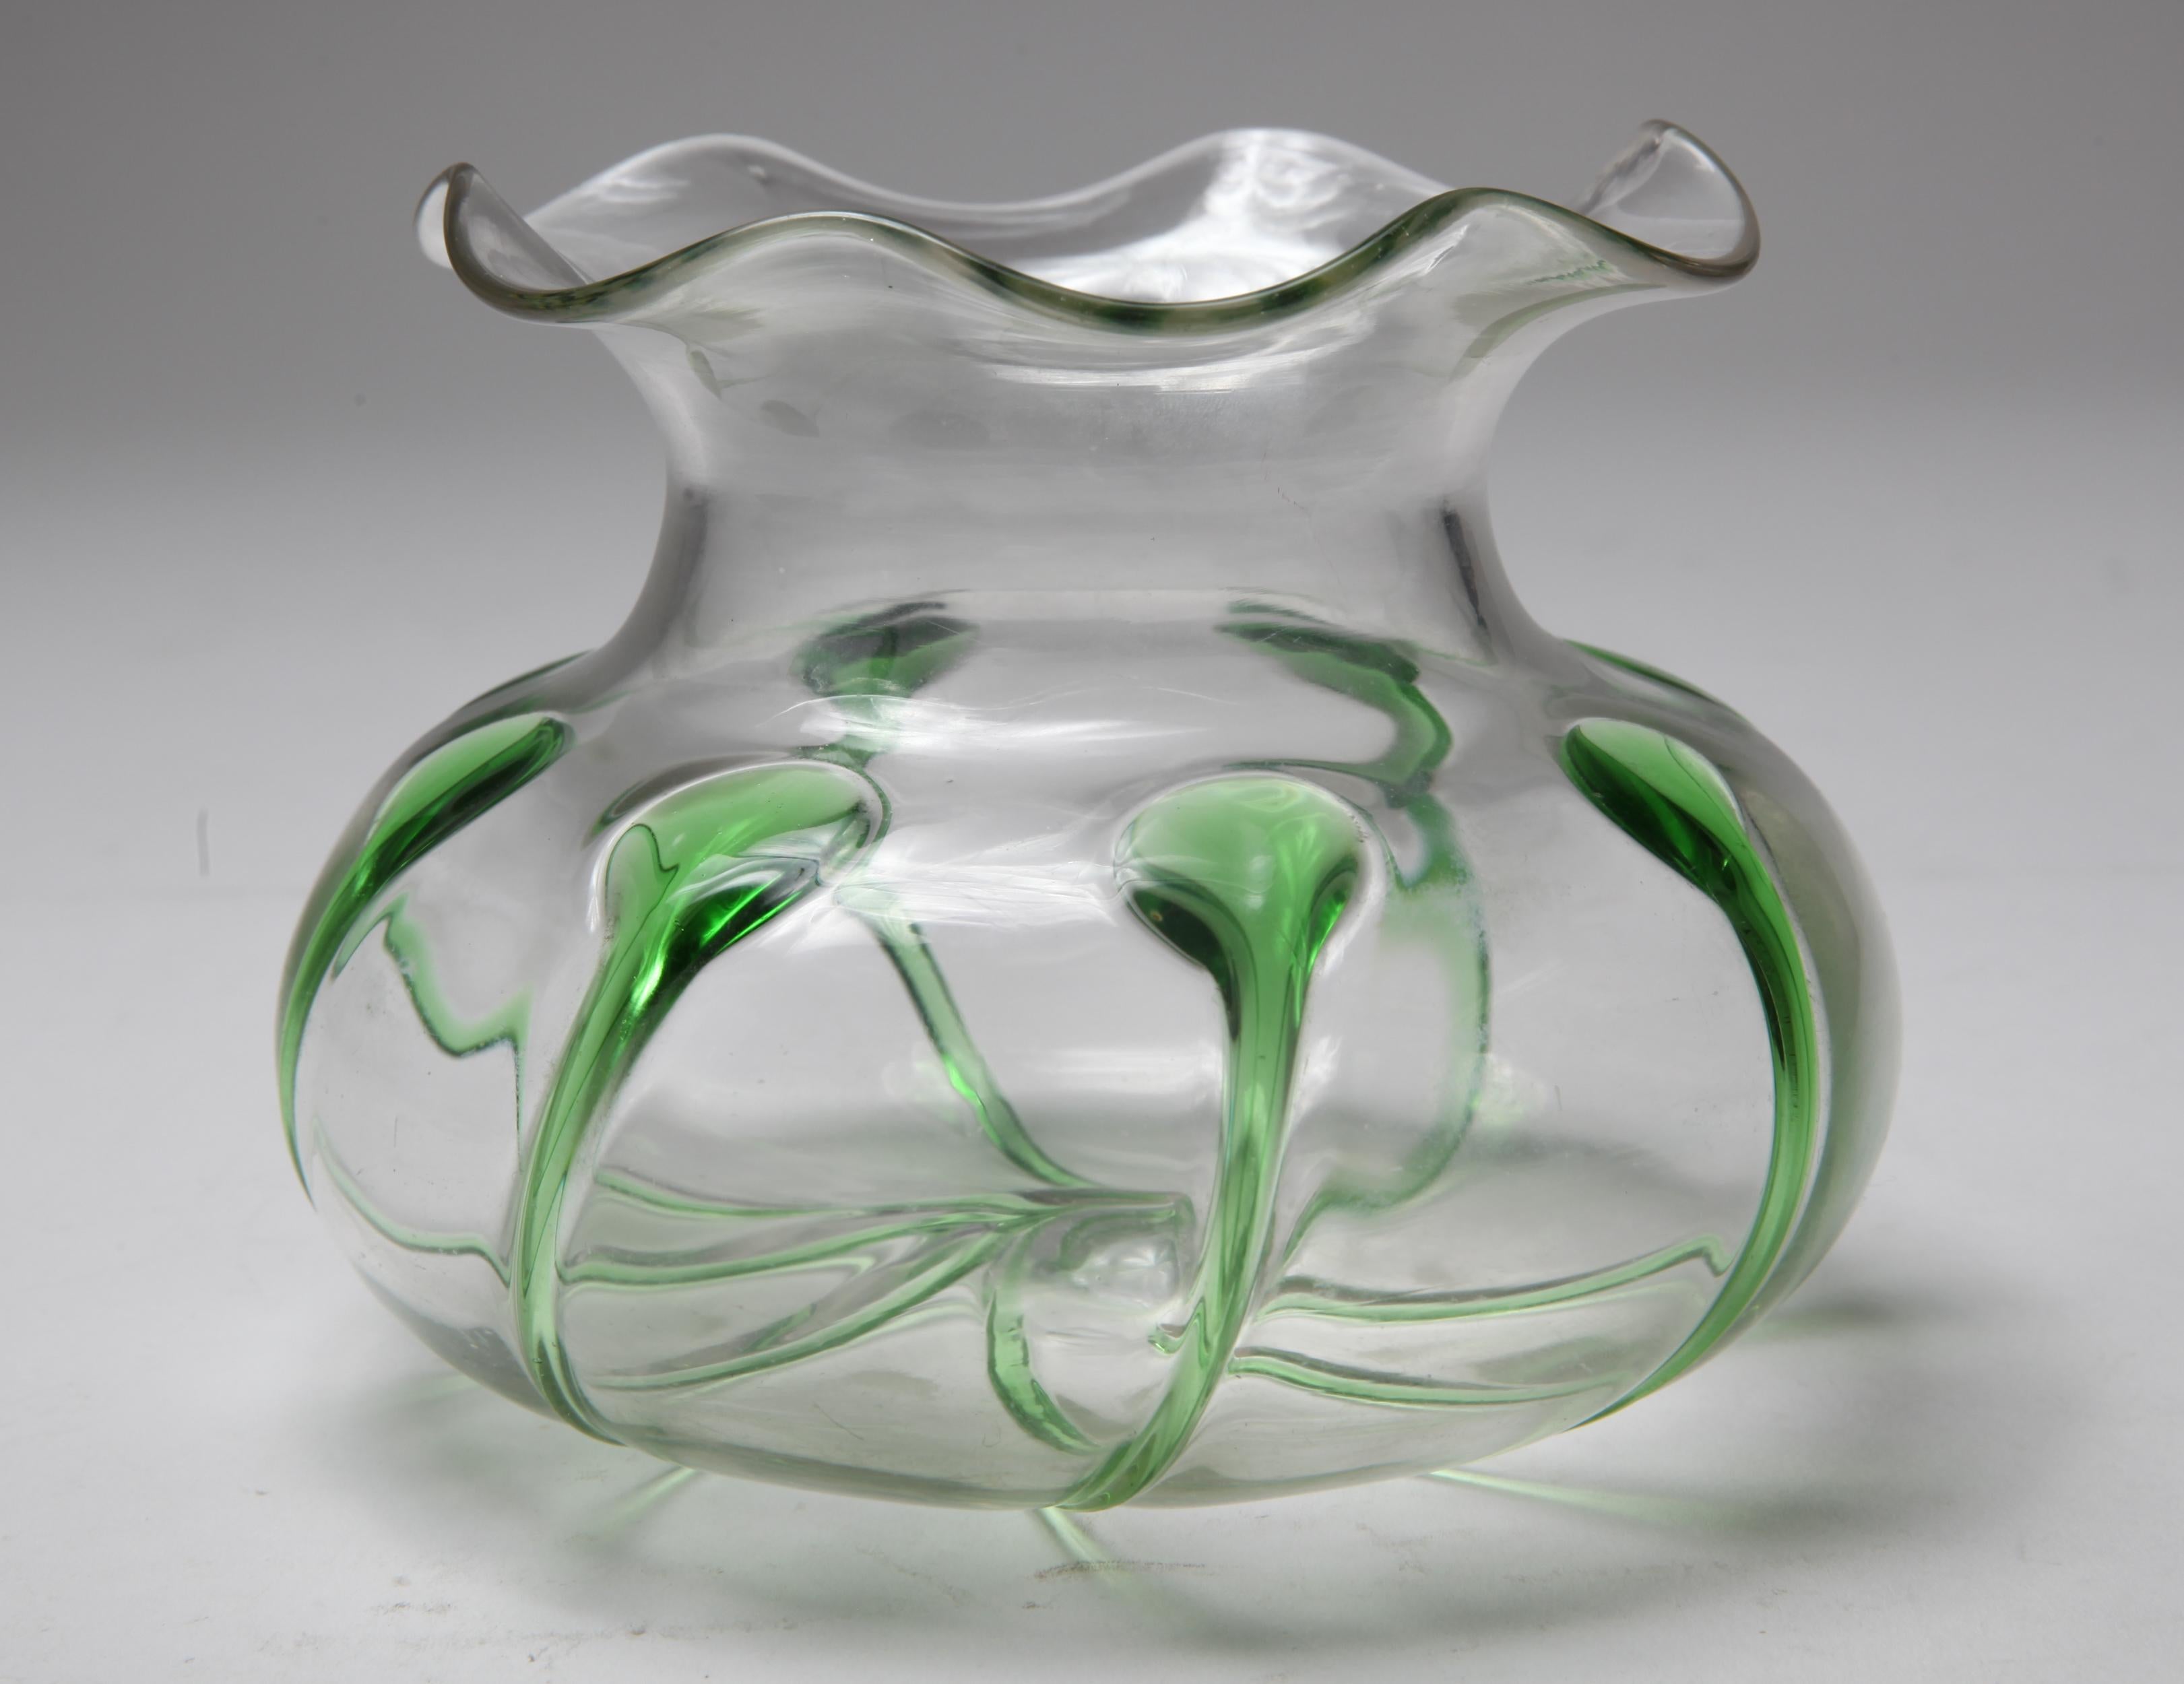 Art Nouveau style decorative circular glass bowl with green accents. The piece was likely made during the mid-20th century and is in great vintage condition with age-appropriate wear.